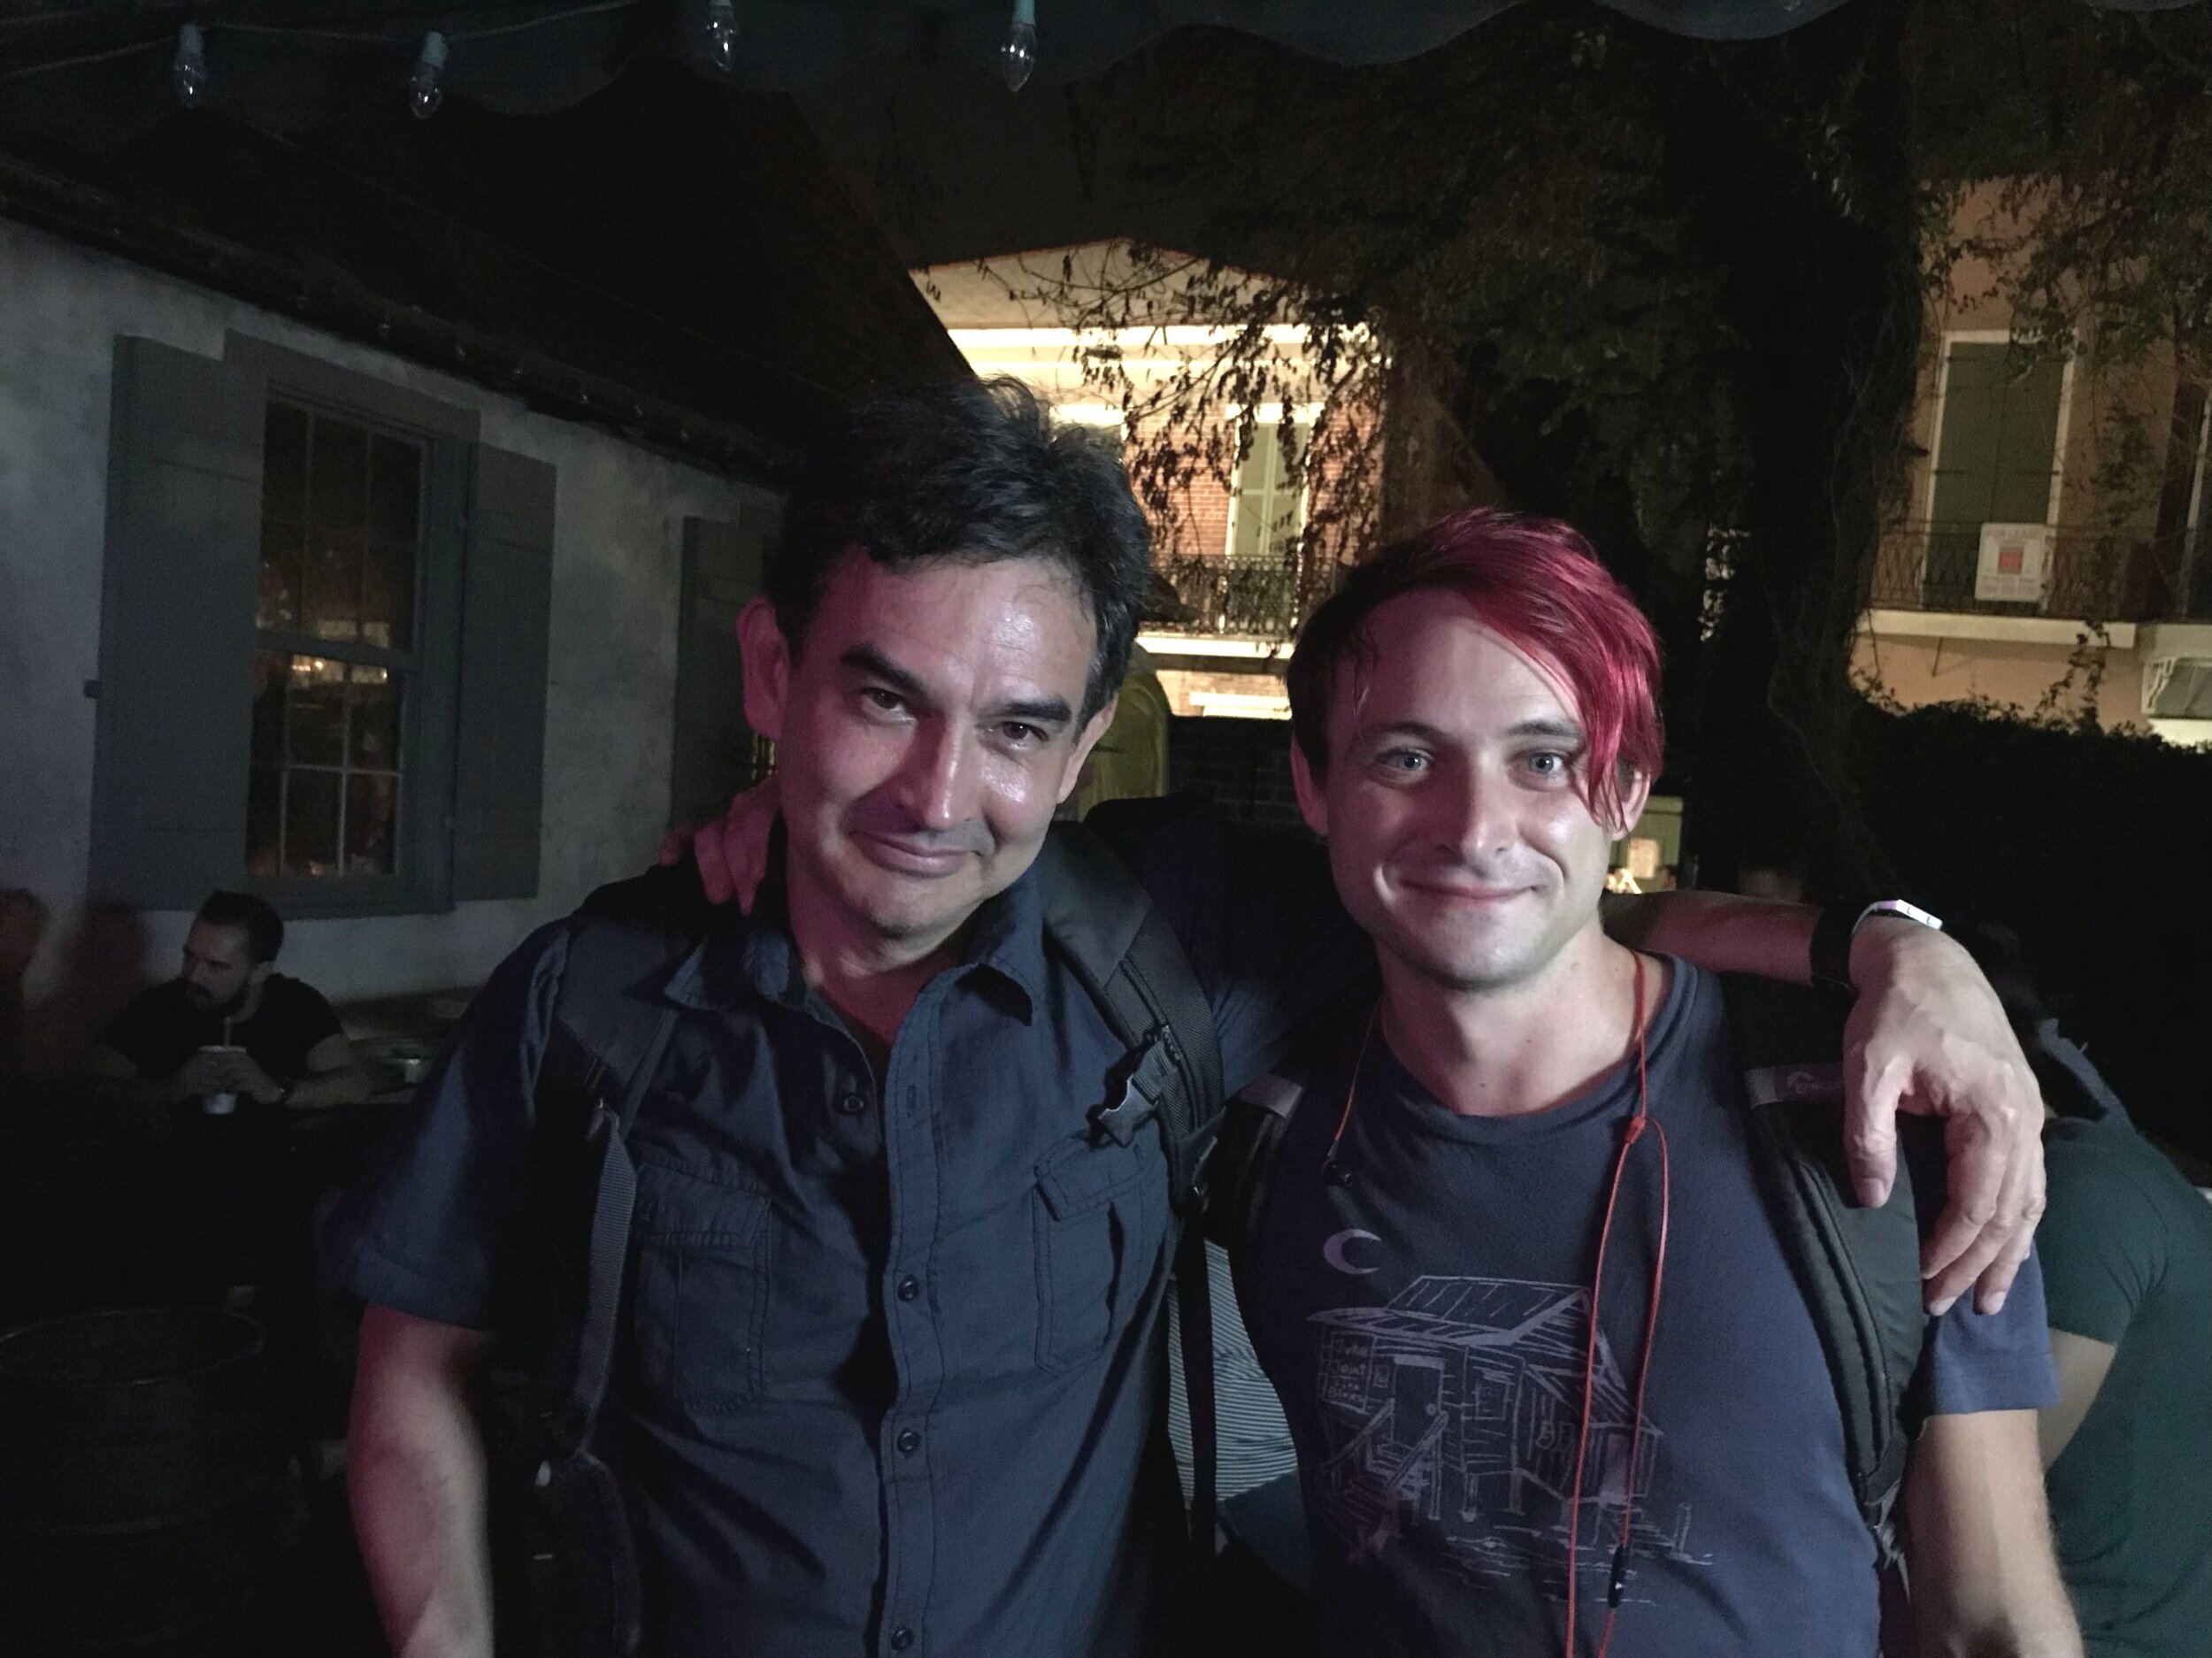  Forrest with New Orleans native  Ryan Caligari  of the  Rumor Flies podcast  on the back patio of  Lafitte’s Blacksmith Shop Bar  in 2018 